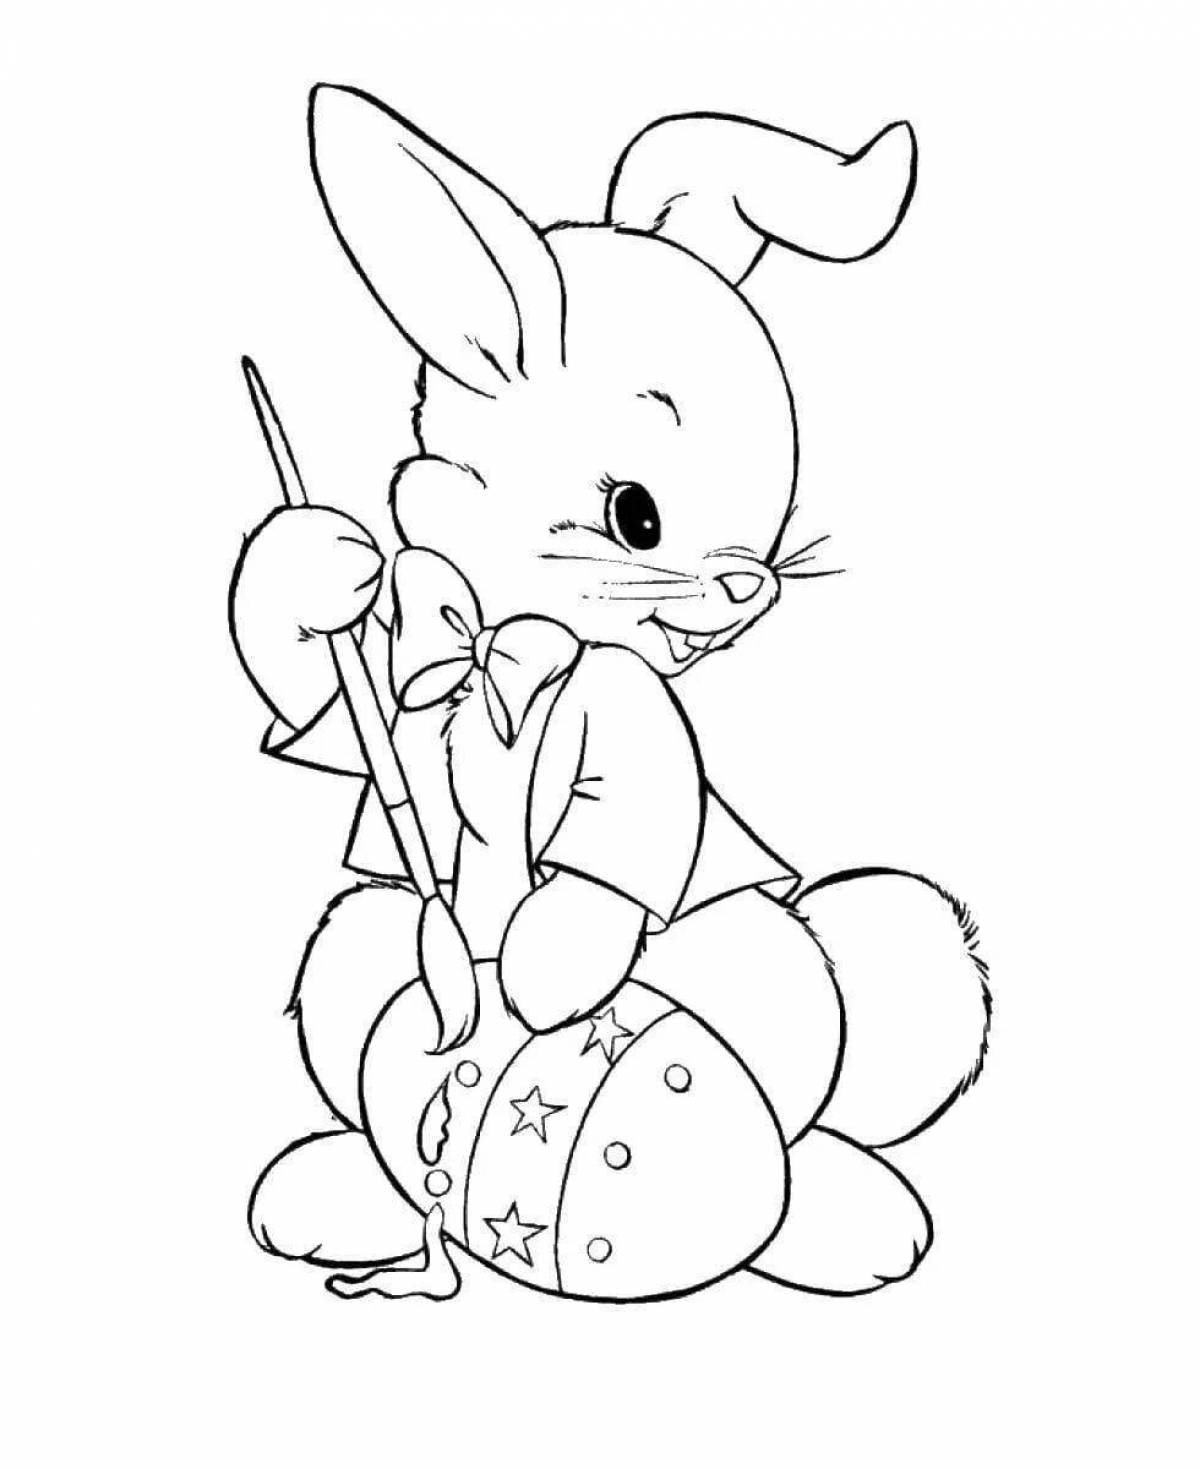 Silly bunny coloring book for kids